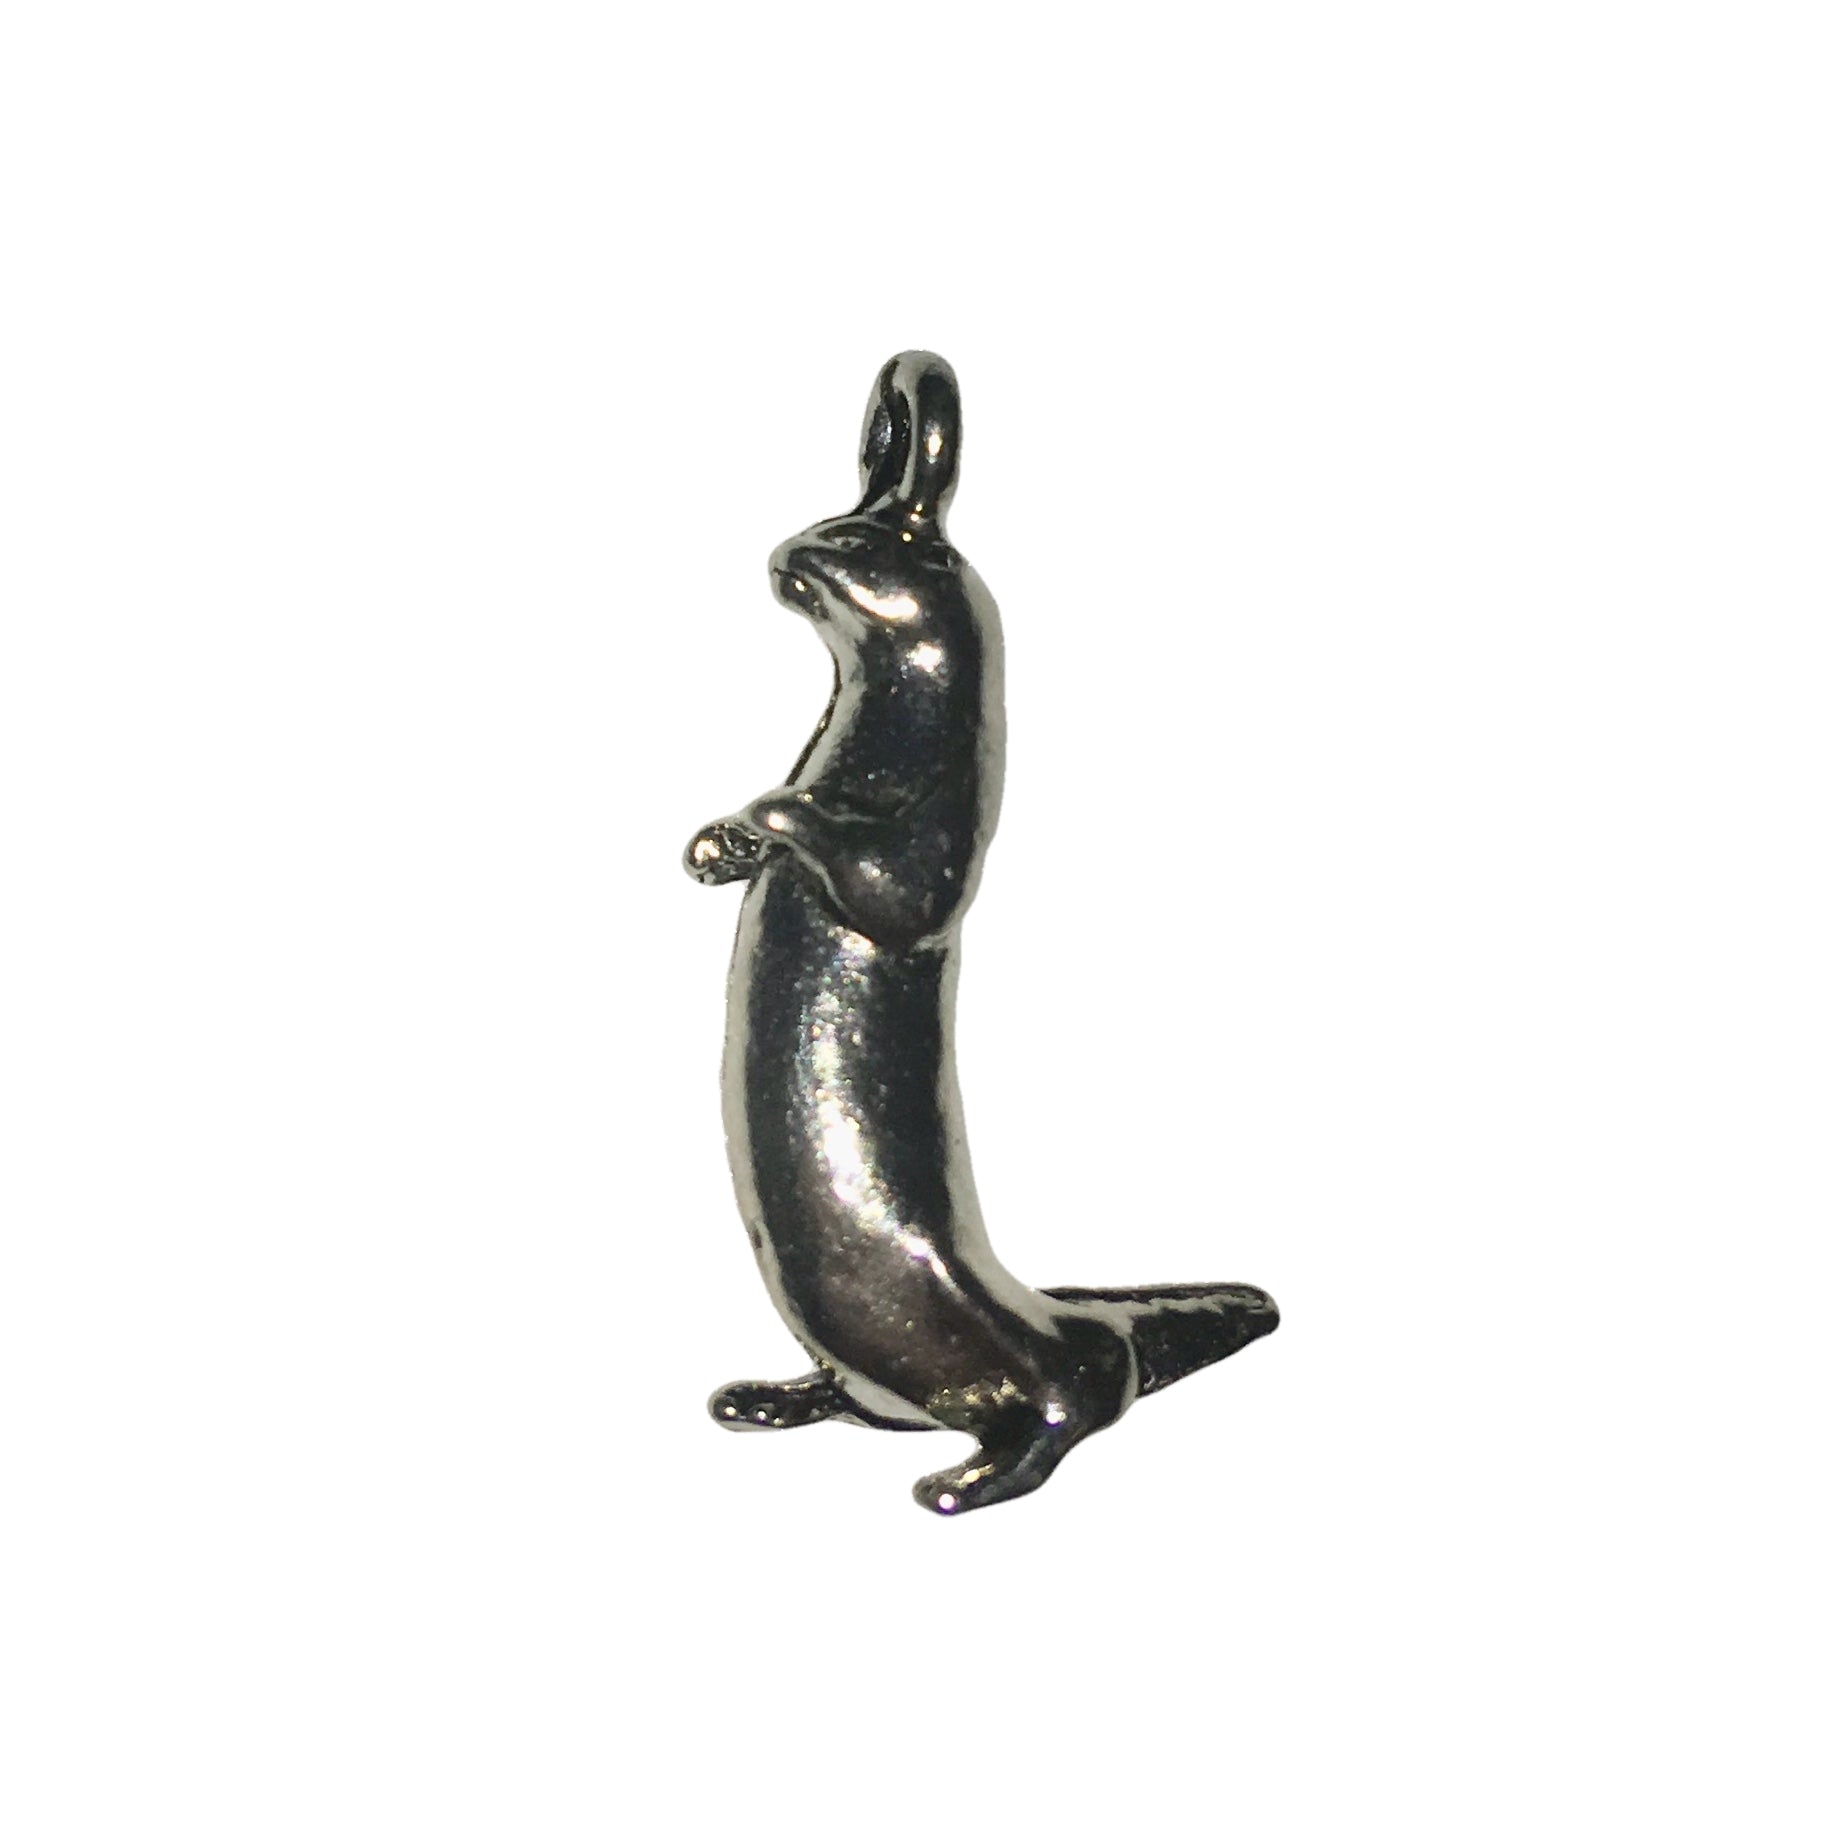 Otter Charms - Qty 5 - Lead Free Pewter Silver - American Made